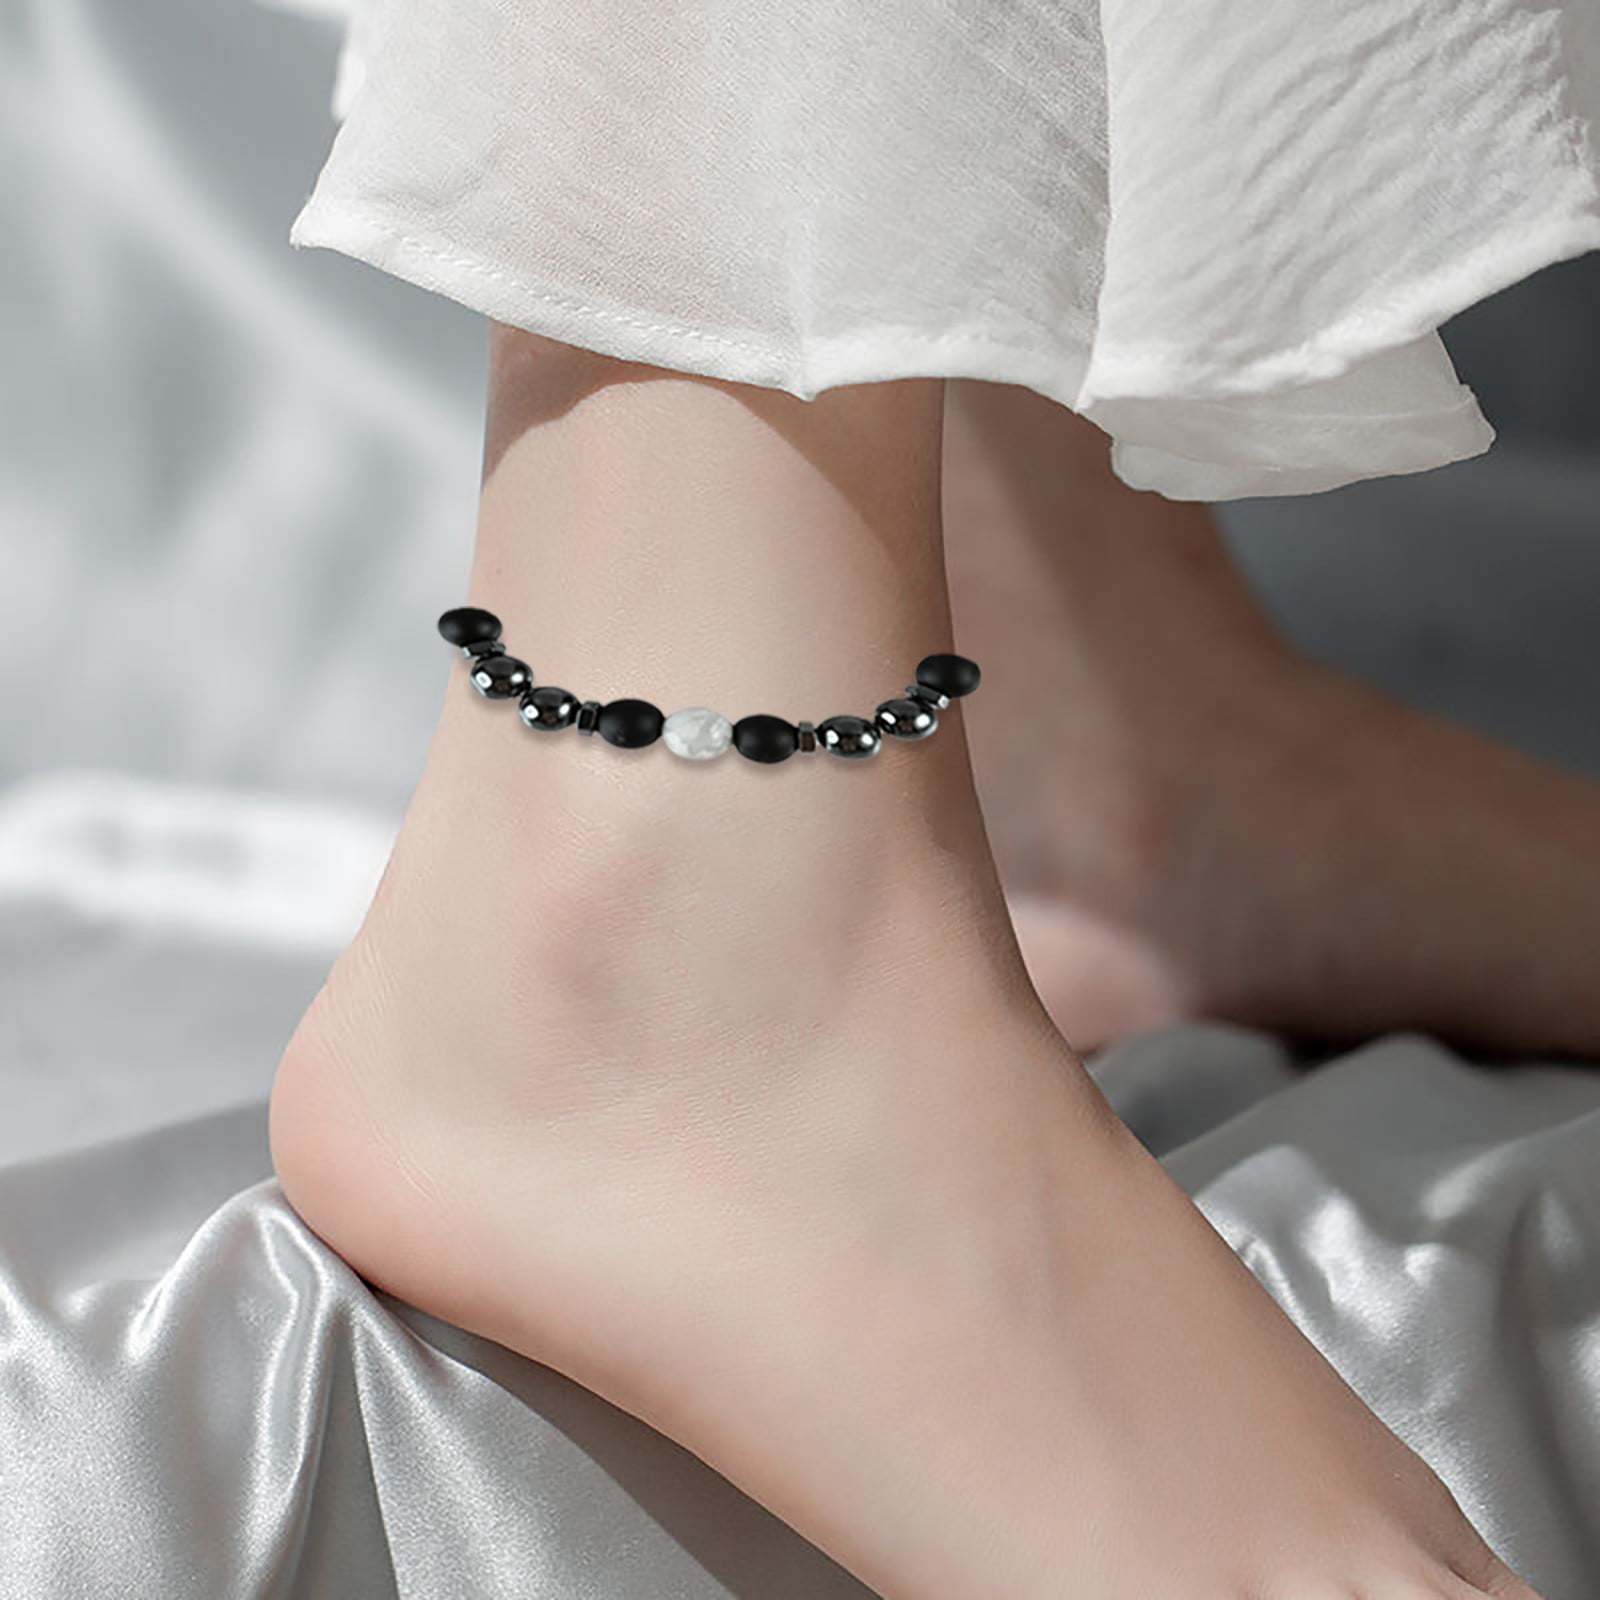 Joelle Jewelry Design Personalized Gift Ankle Bracelet 925 Sterling Silver or 18k Gold Plated Beach Wear Writing Gift for Her Wedding Bridesmaid Gift Sweetheart